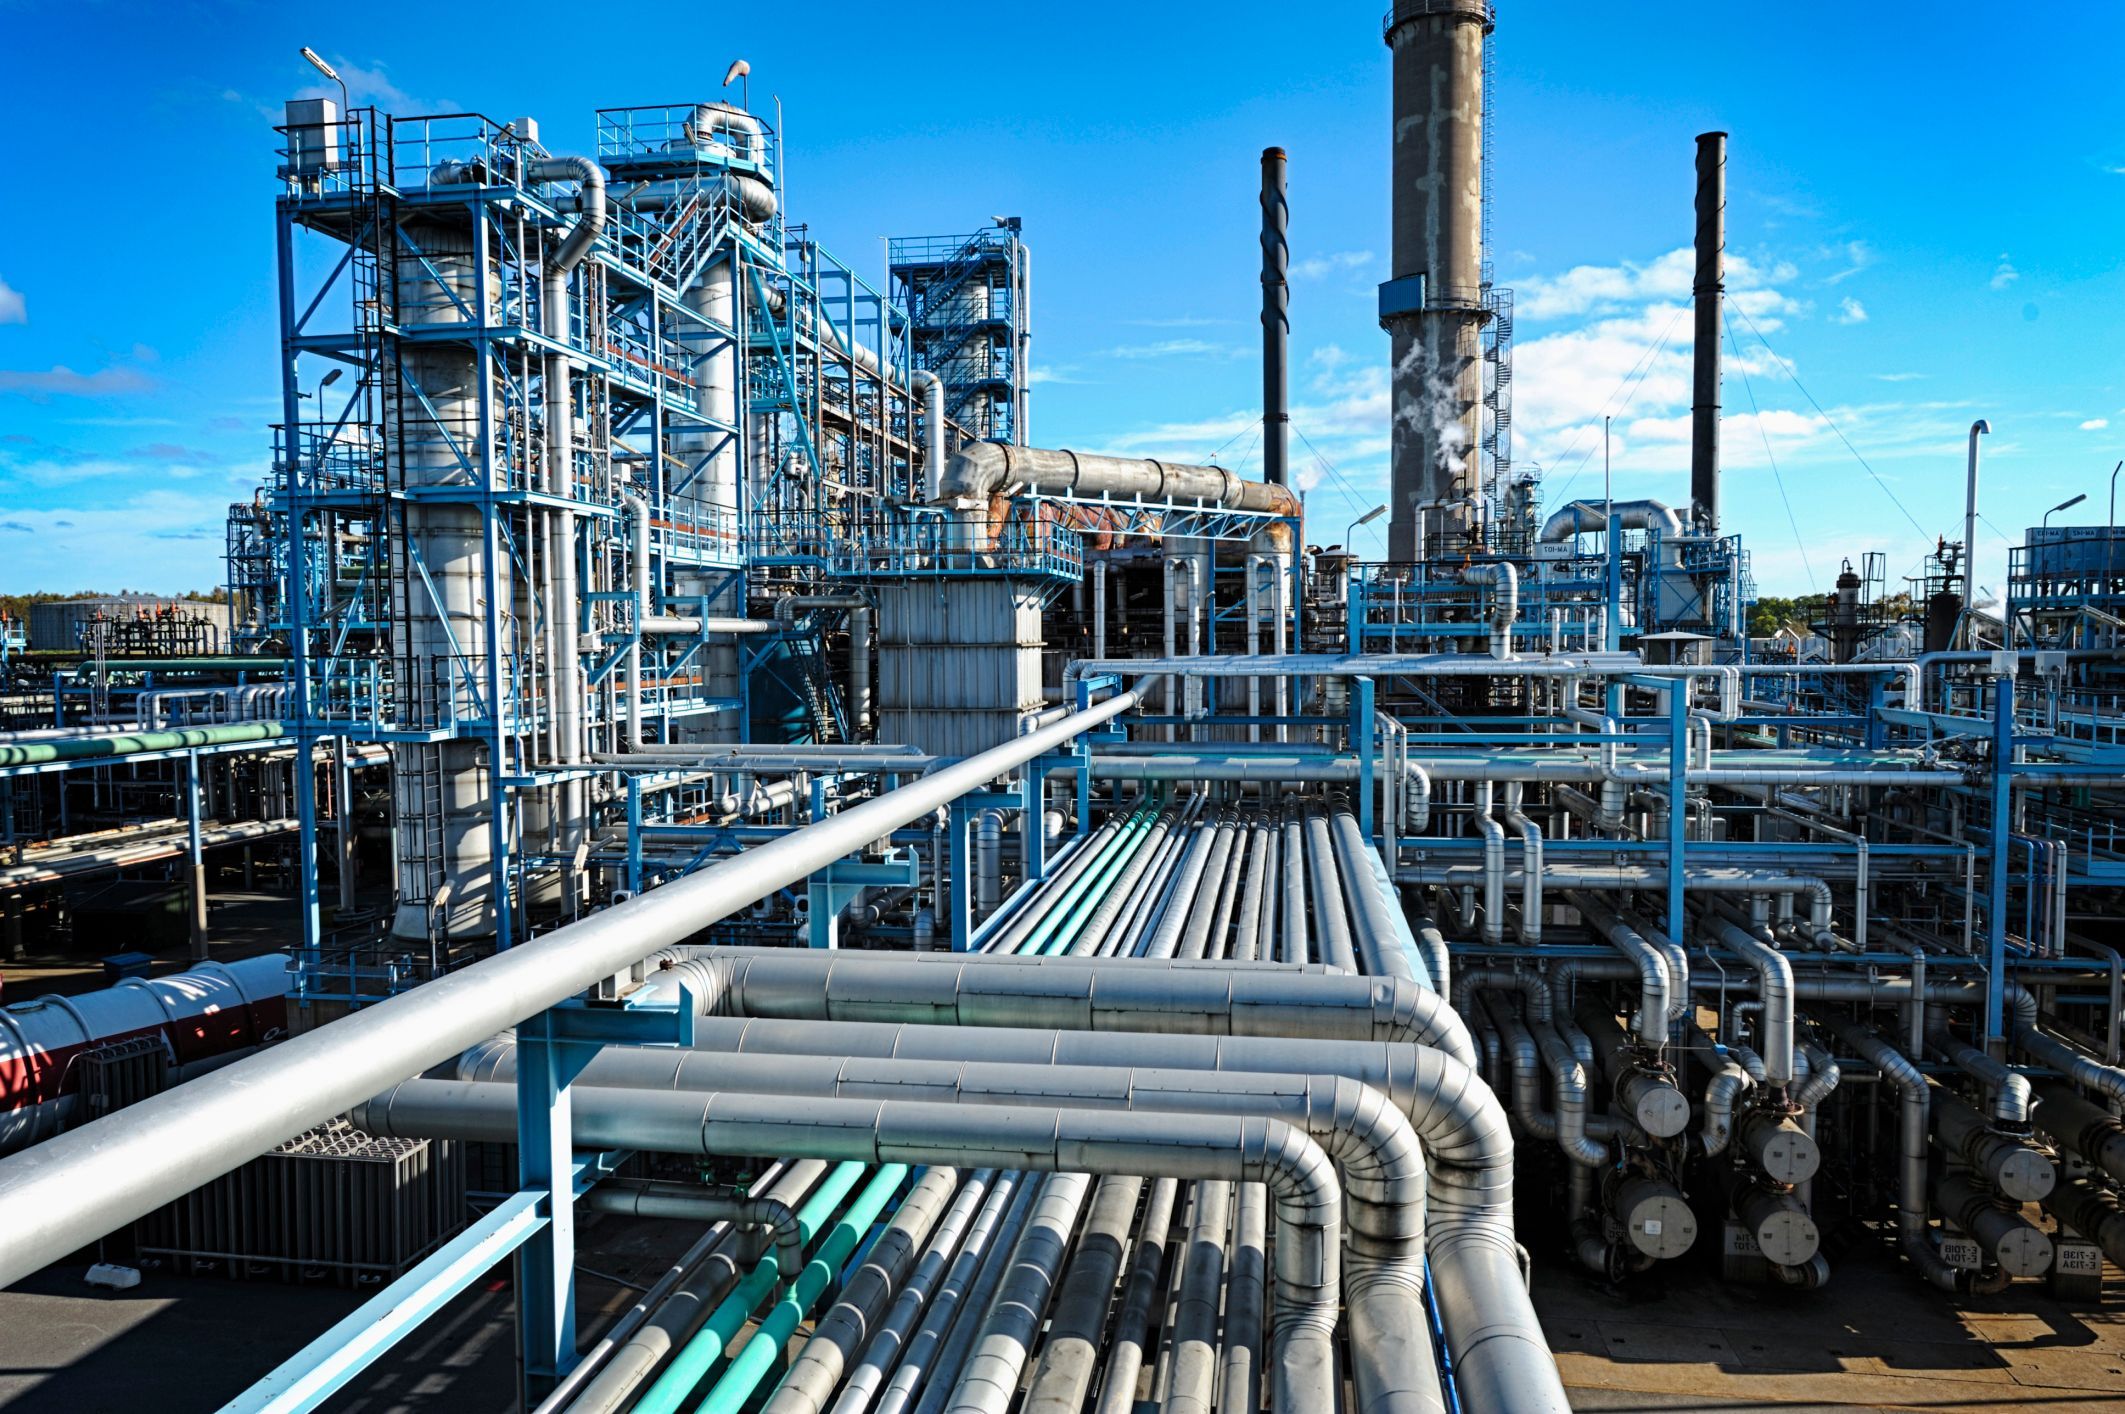 petroleum refinery with pipes